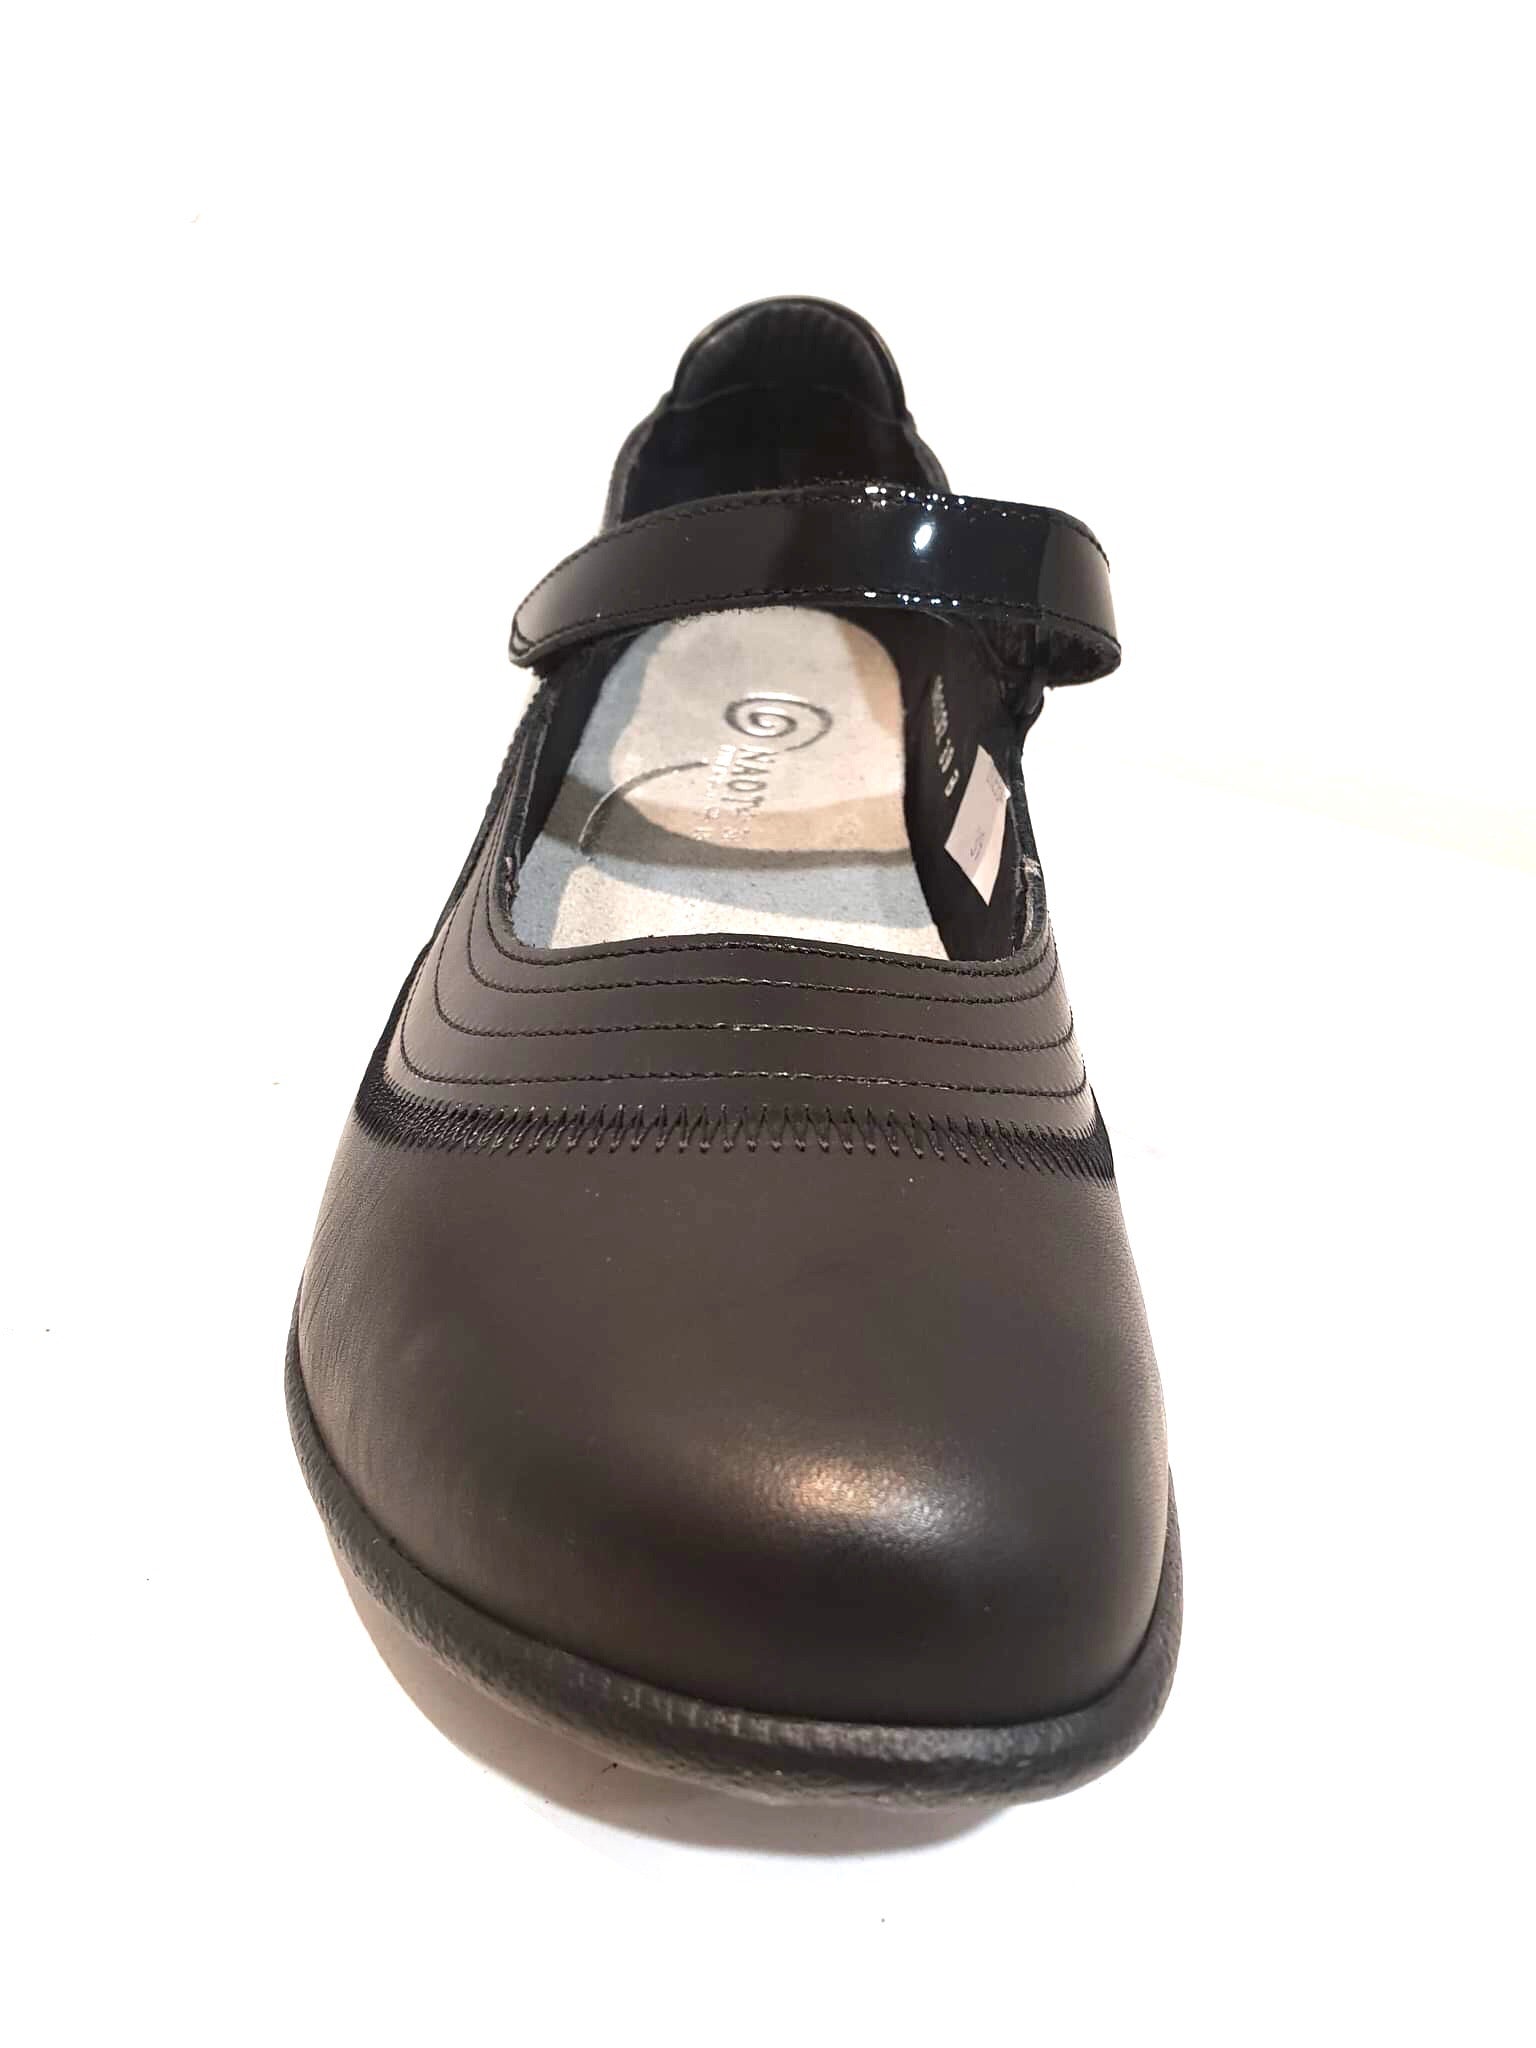 Naot Kirei Black Combo Leather Velcro Mary Janes Ladies Shoes Made In Israel